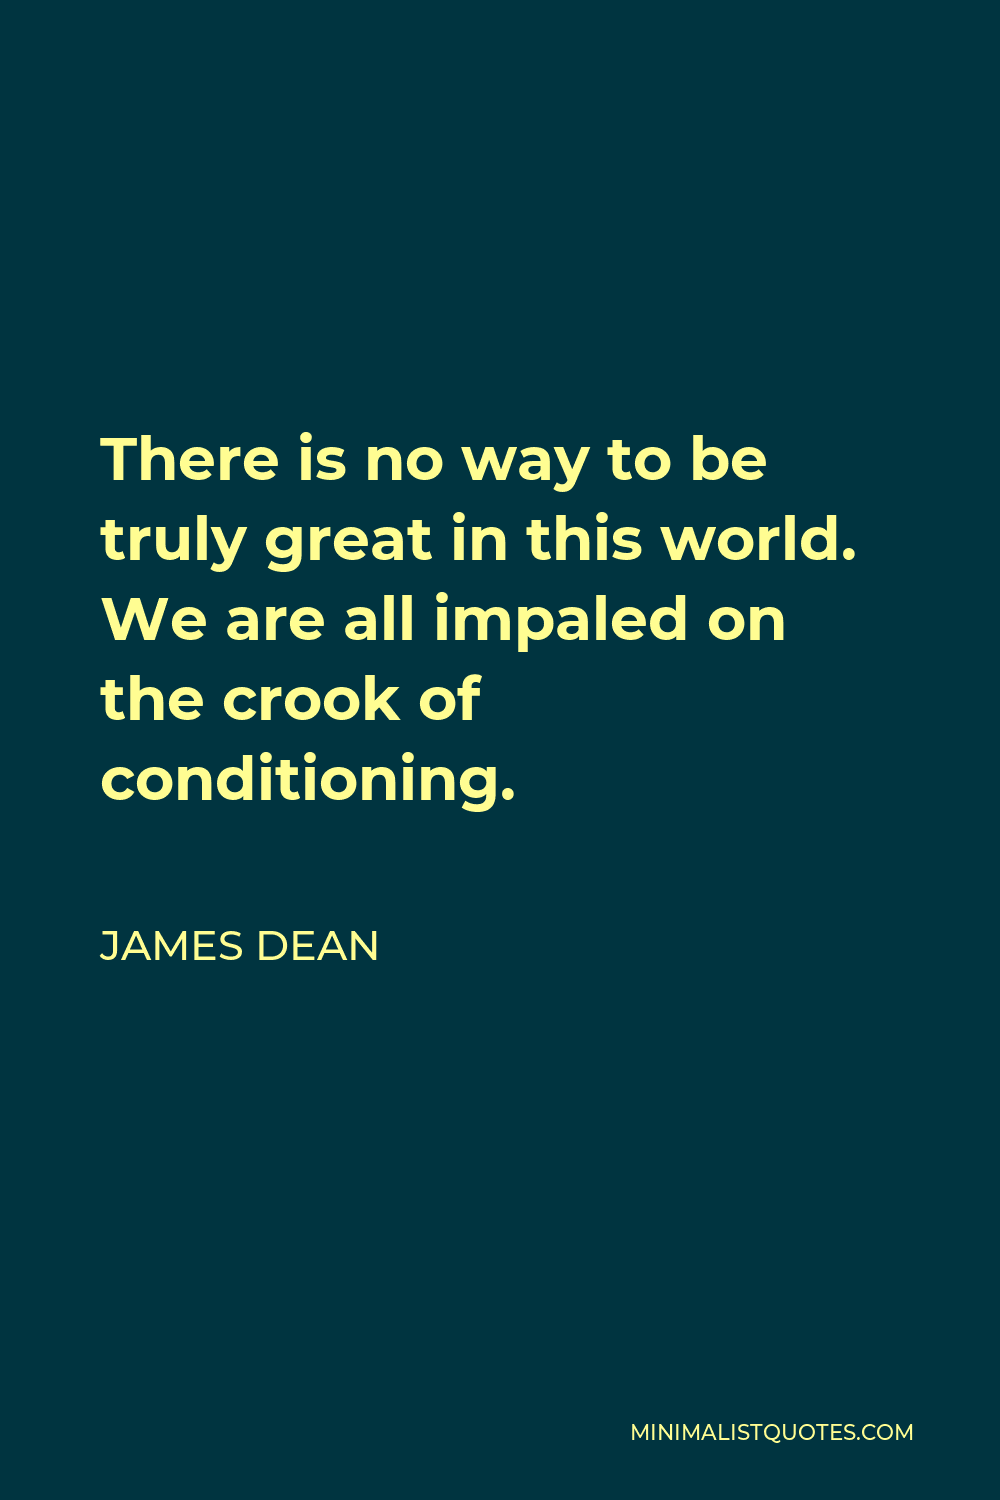 James Dean Quote - There is no way to be truly great in this world. We are impaled on the crook of conditioning.